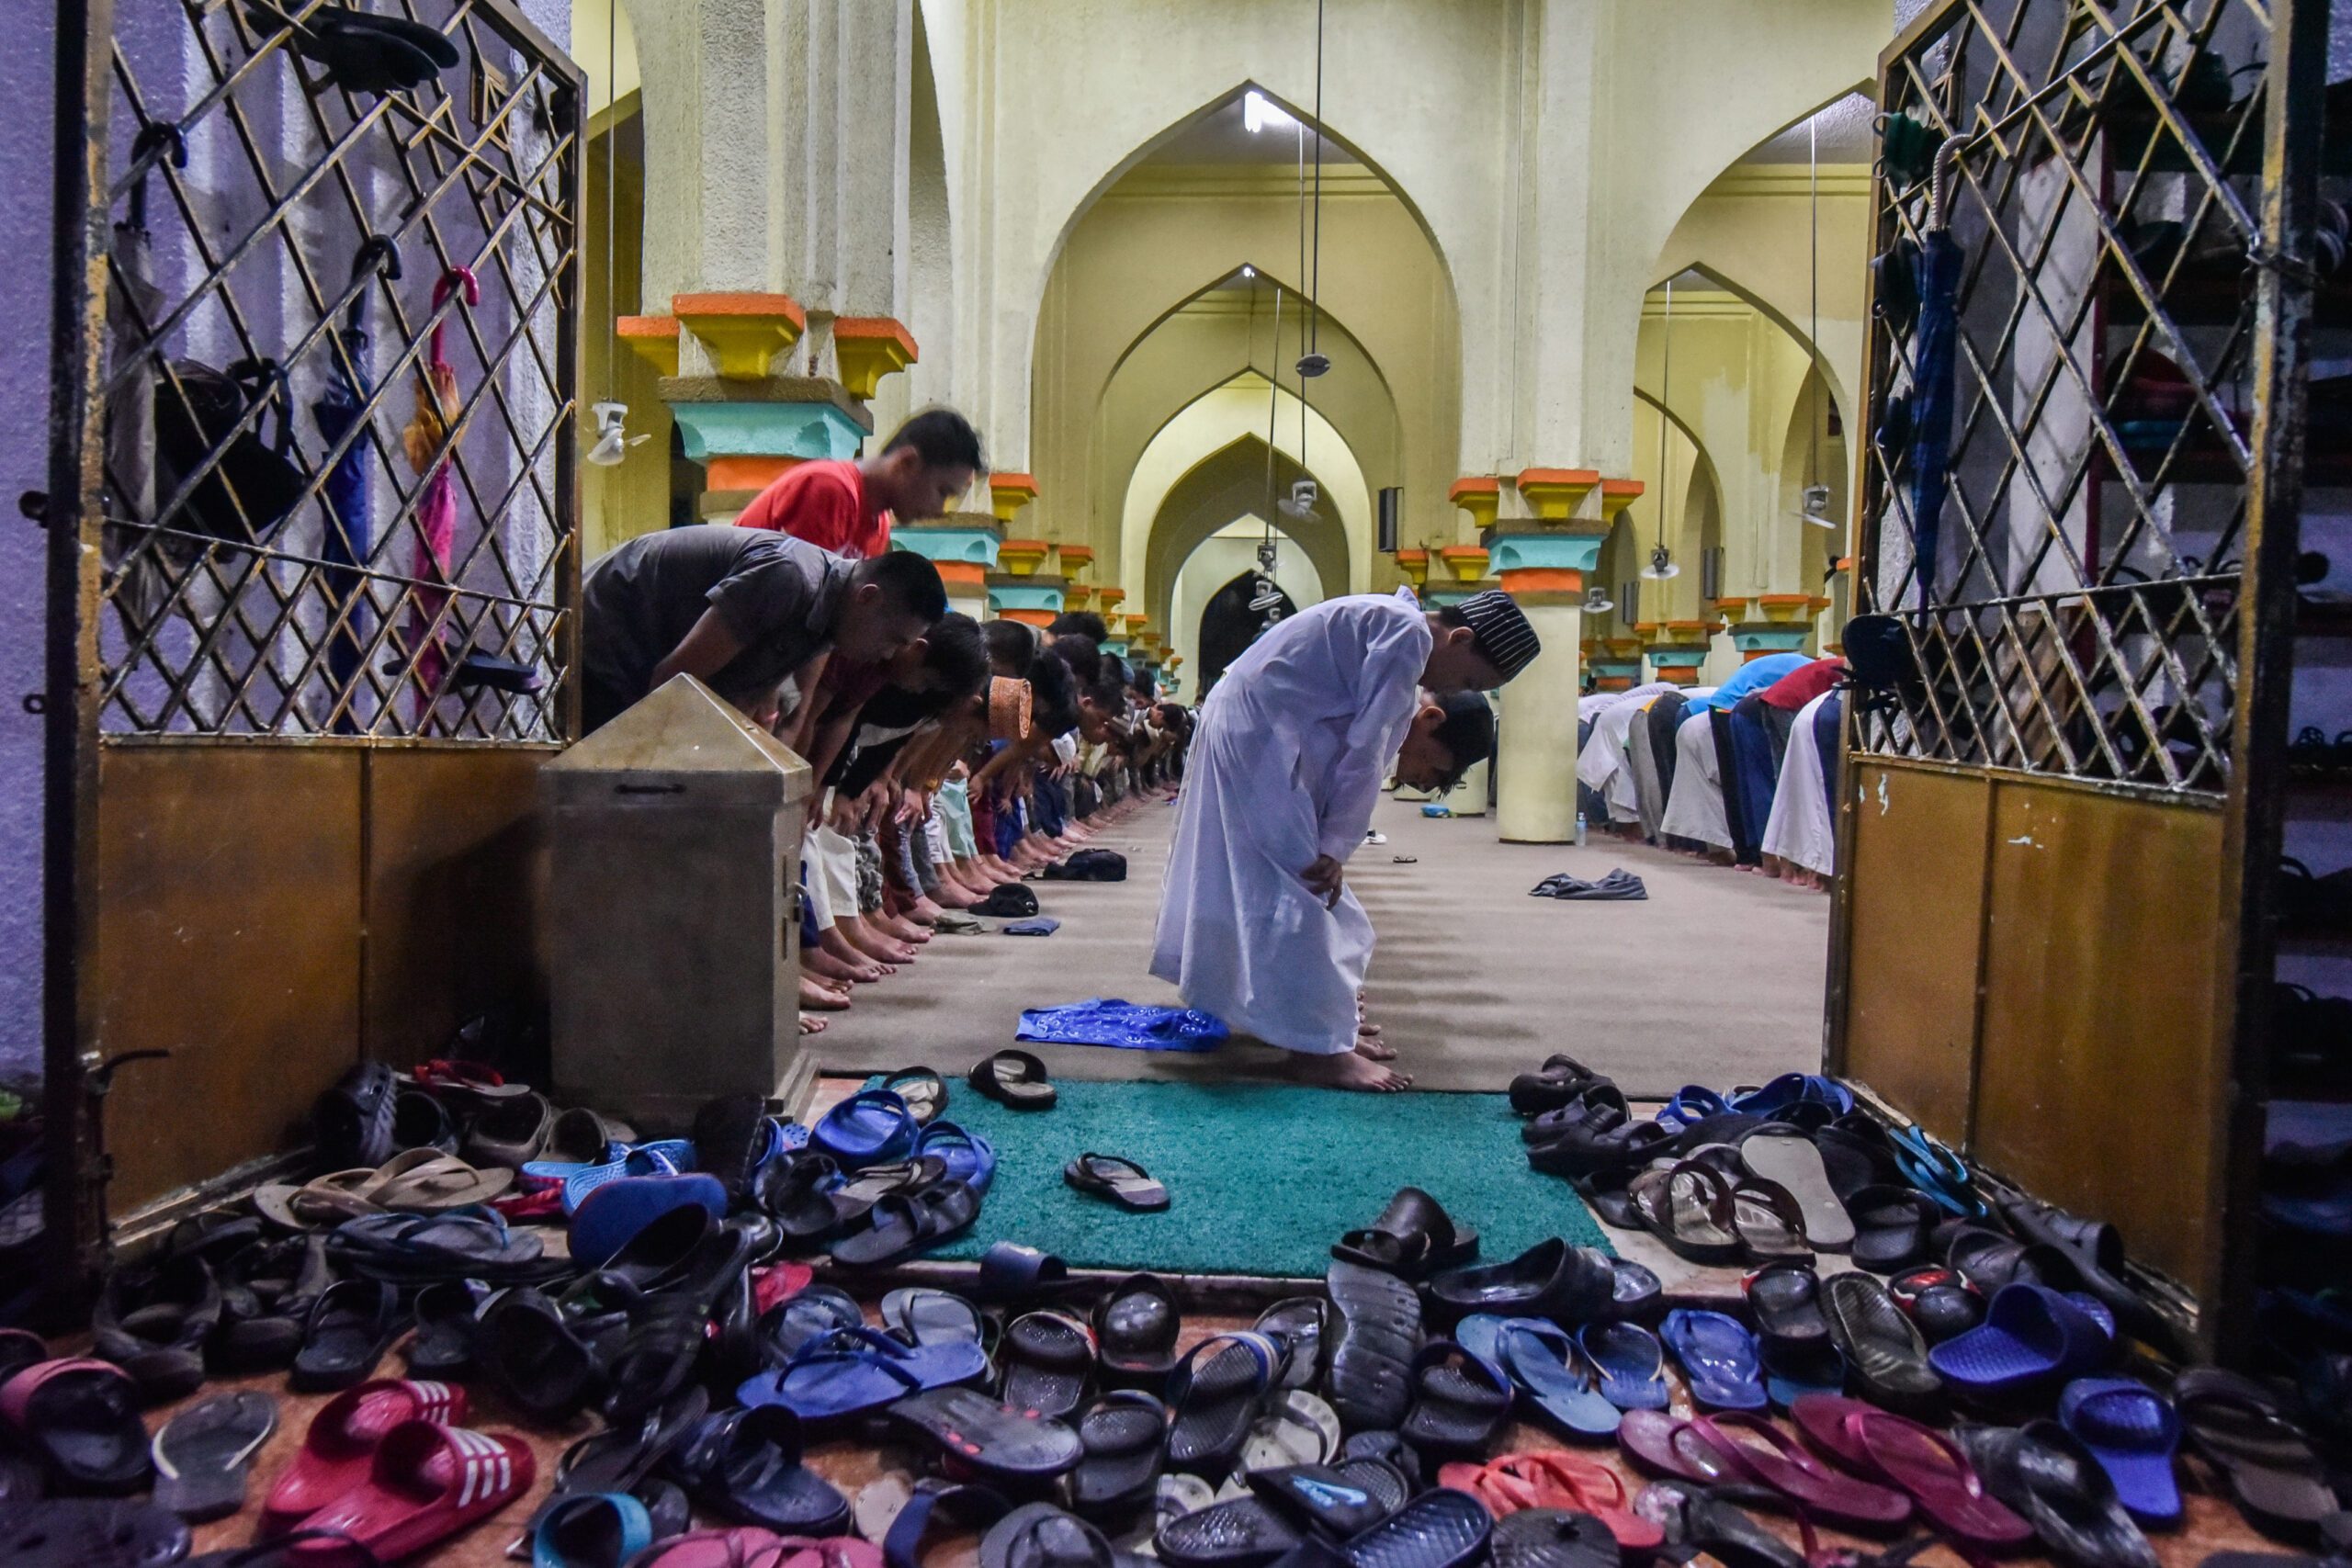 Ramadan begins for world’s Muslims, violently for some